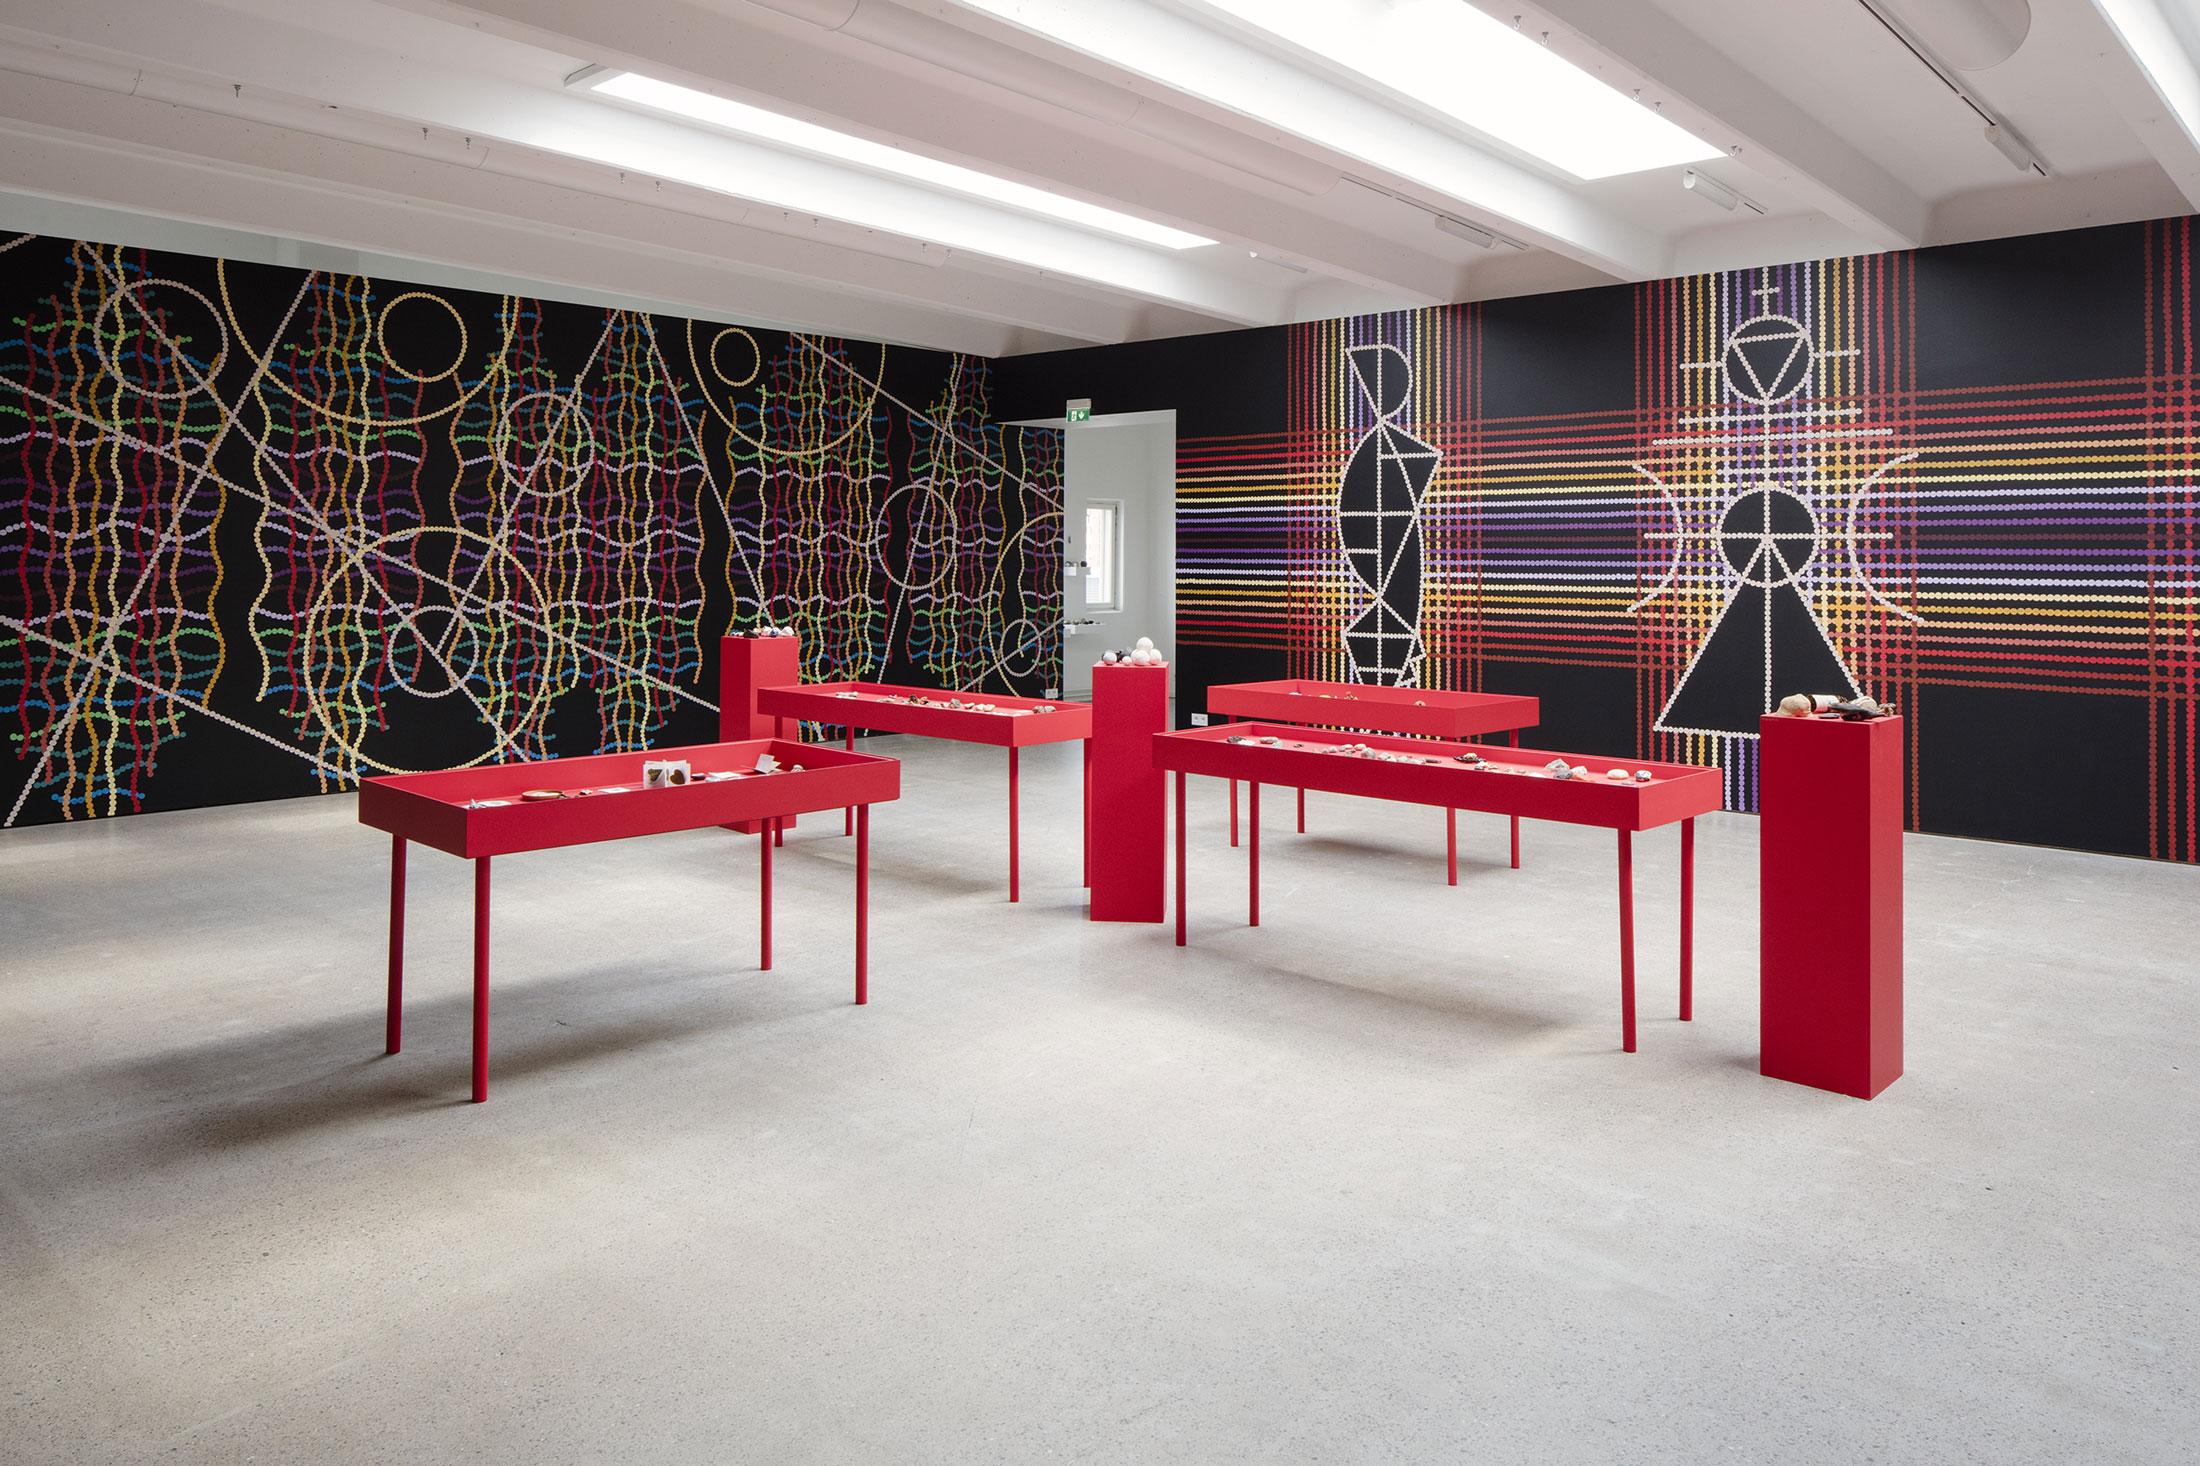 A vast exhibition space, with four red tables and three red pedestals under bright white light. There are vibrant dizzying patterns on the wall.